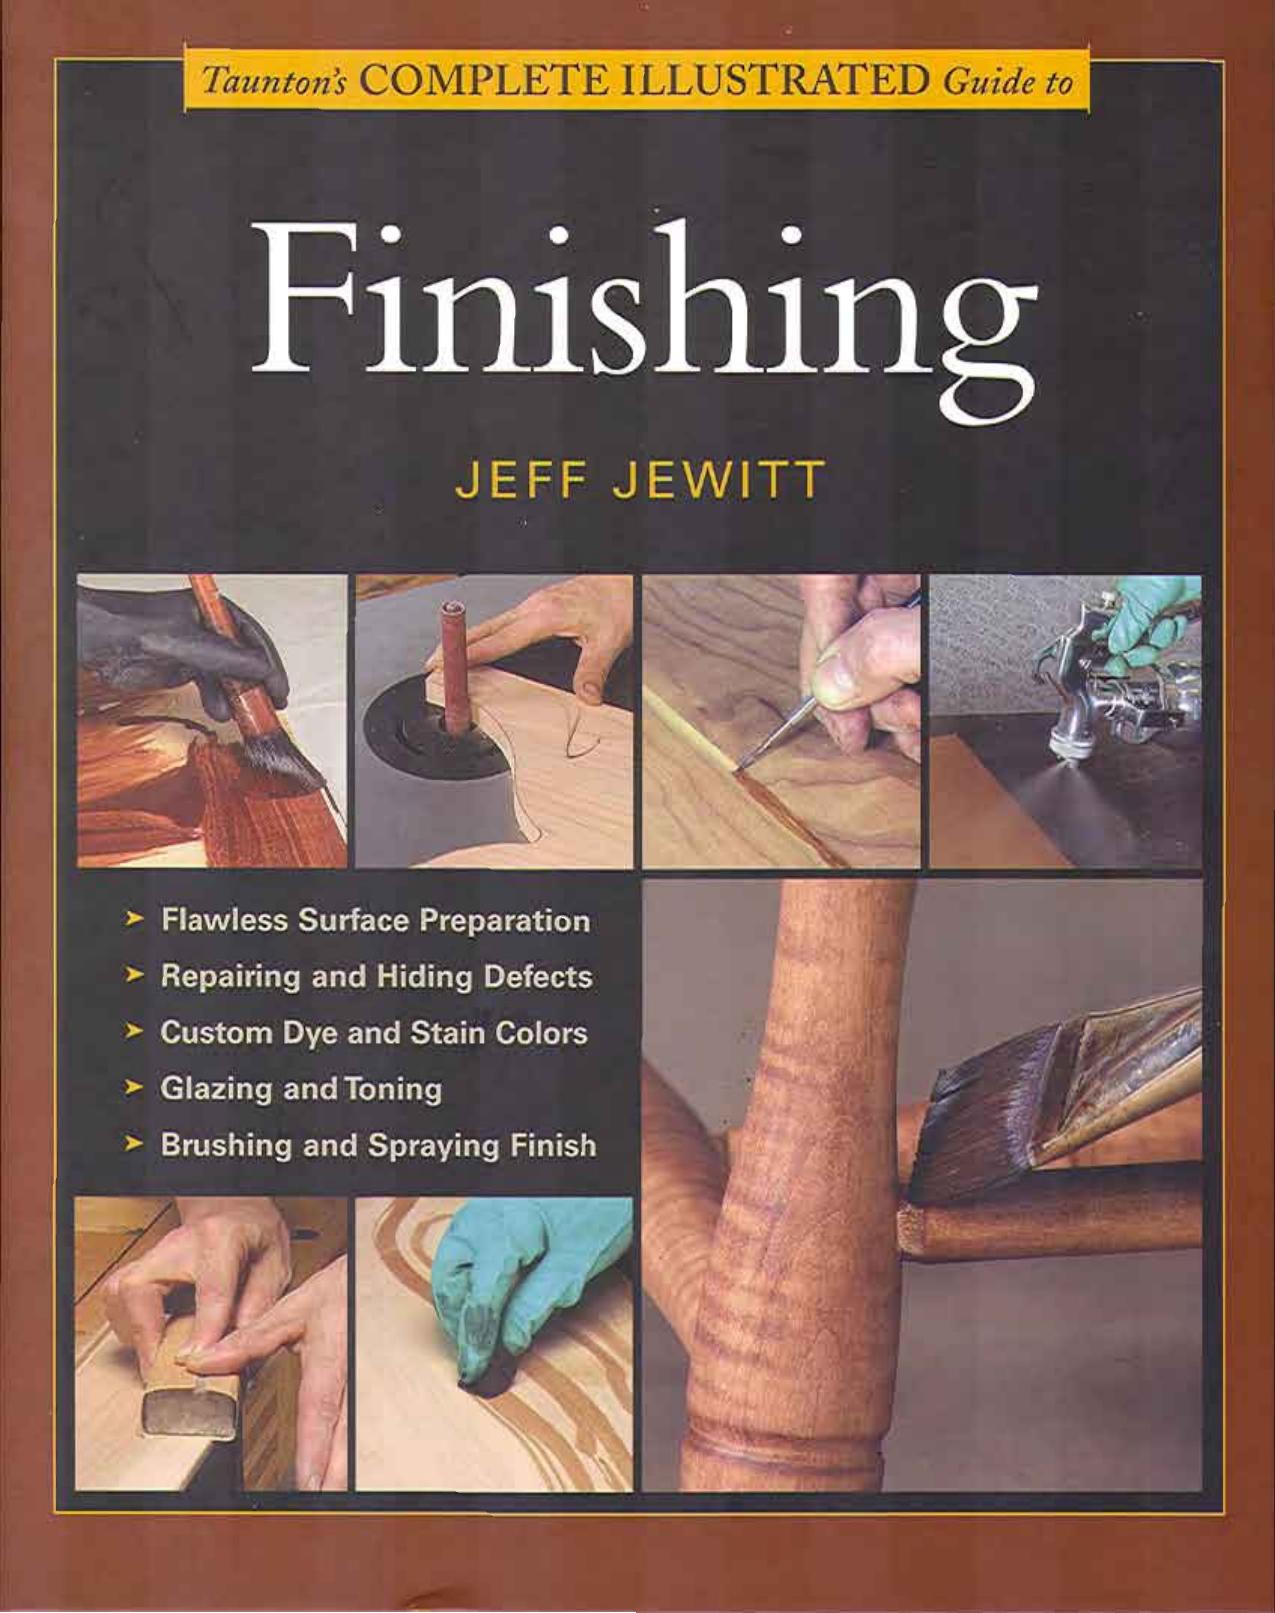 Taunton's Complete Illustrated Guide to Finishing by Jeff Jewitt by Unknown